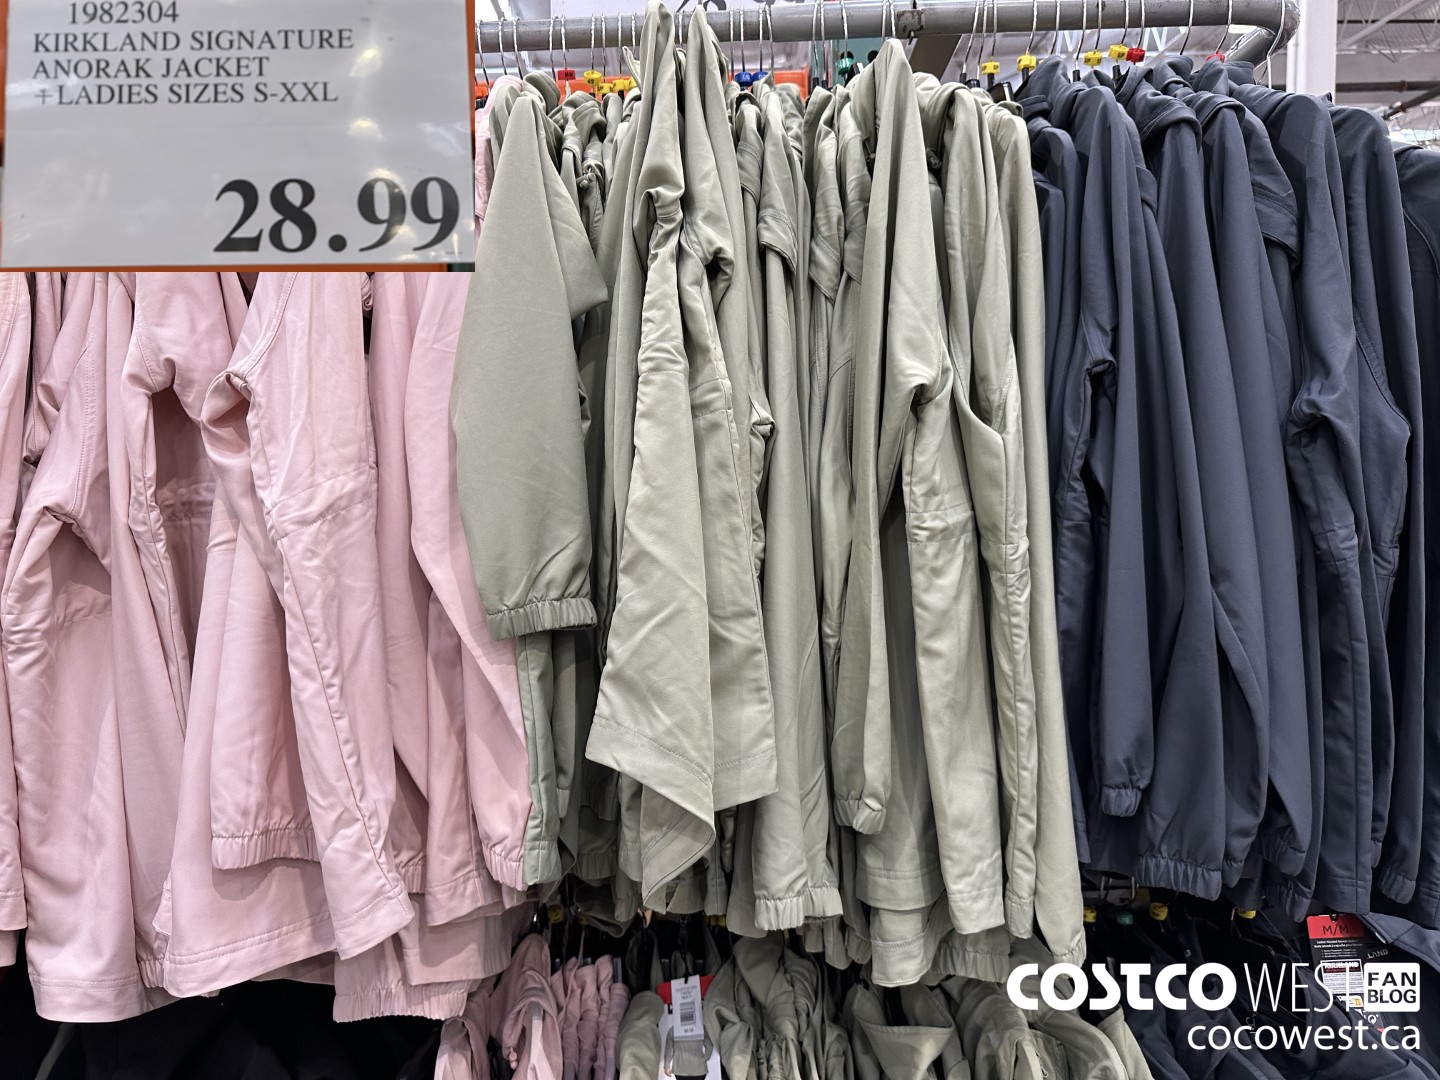 Costco Clothing 2023 Superpost – Spring Jackets, Footwear, Shorts & Shirts  - Costco West Fan Blog